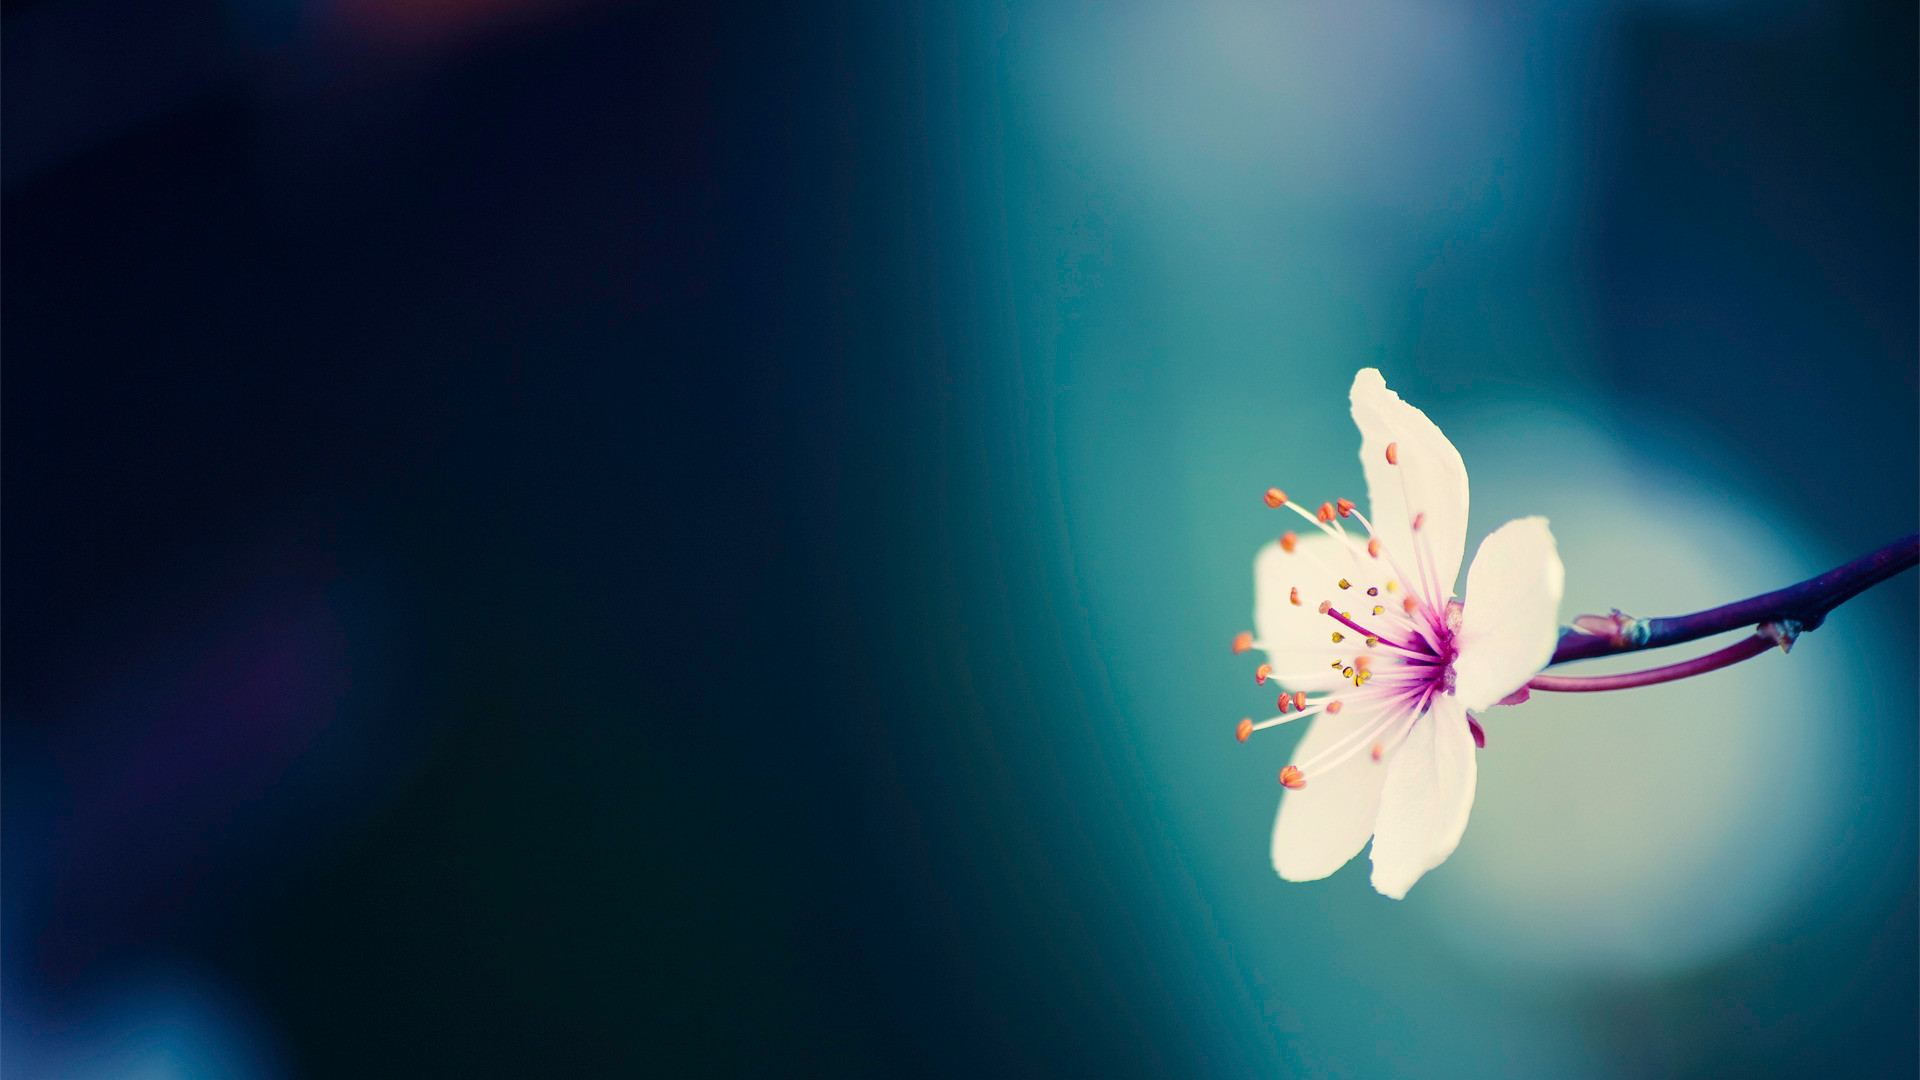 Wallpaper Blue and White Butterfly on Blue Flower Background  Download  Free Image